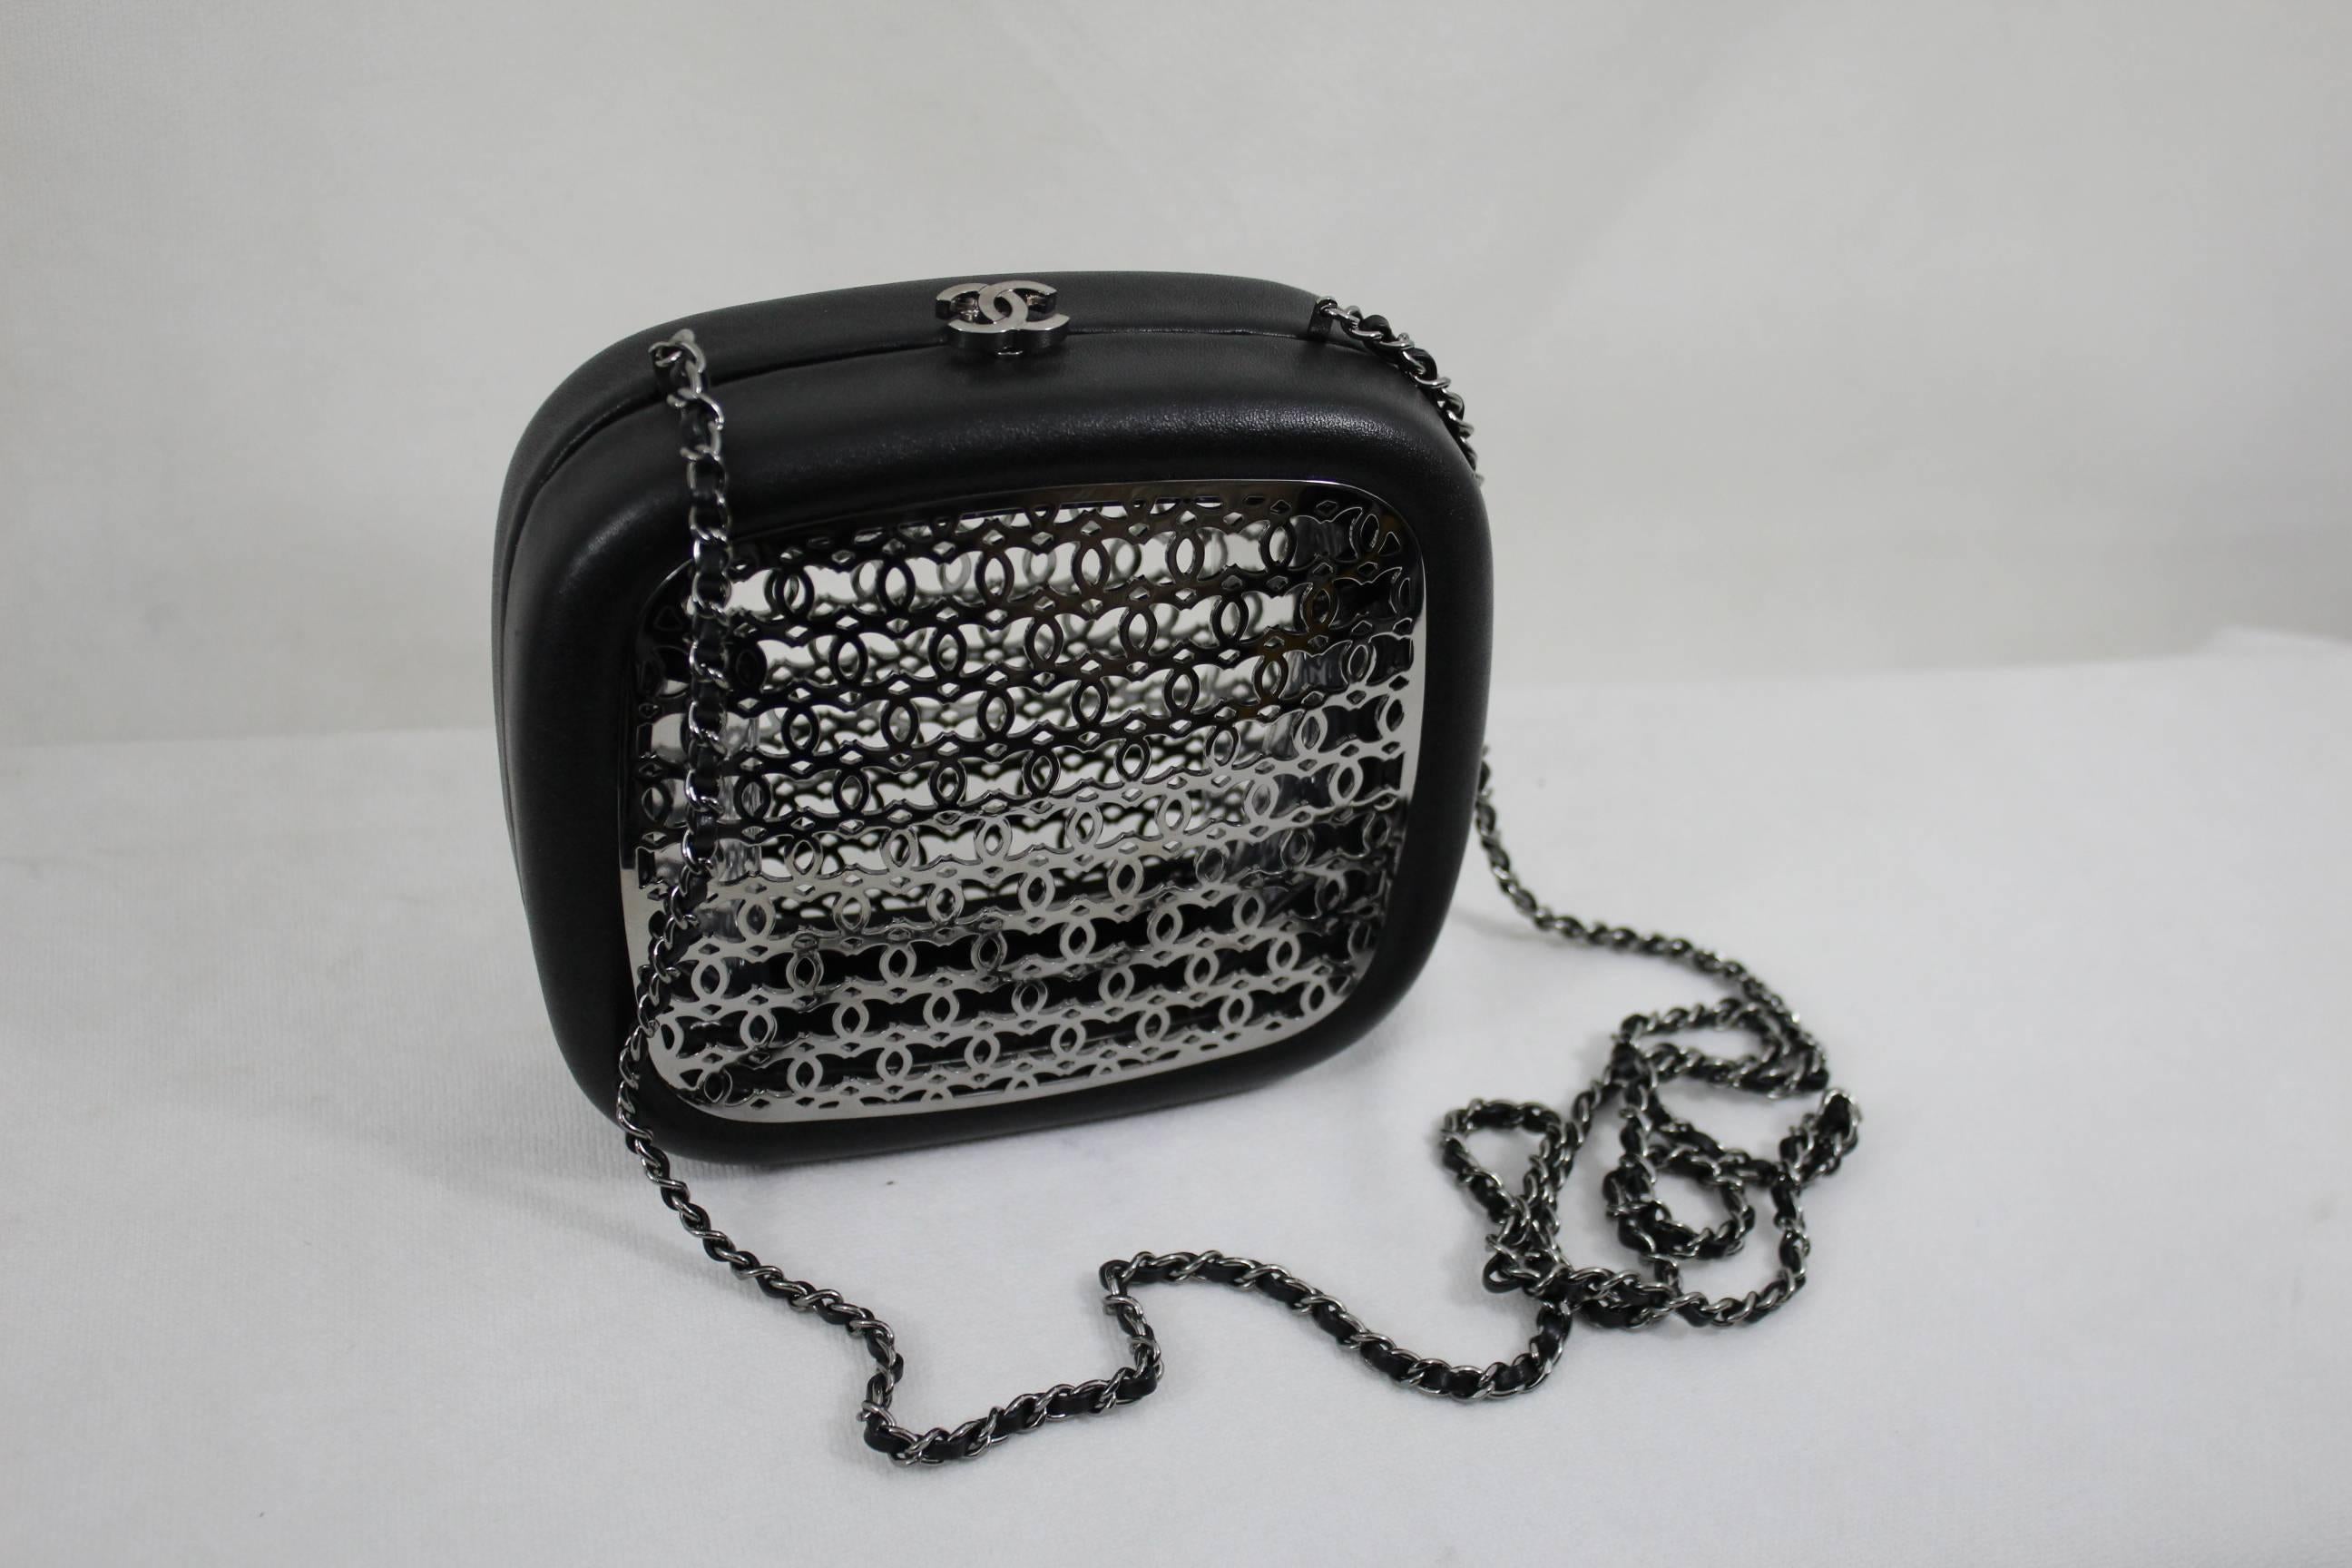 For sale clutch from the Paris Dubai cruise collection. It is mande in black leather and steel.

It takes the grill that were decorationg 
really good conditon.

This is a Sample made for the collection.

No hologramme inside

Size 14x16 cm